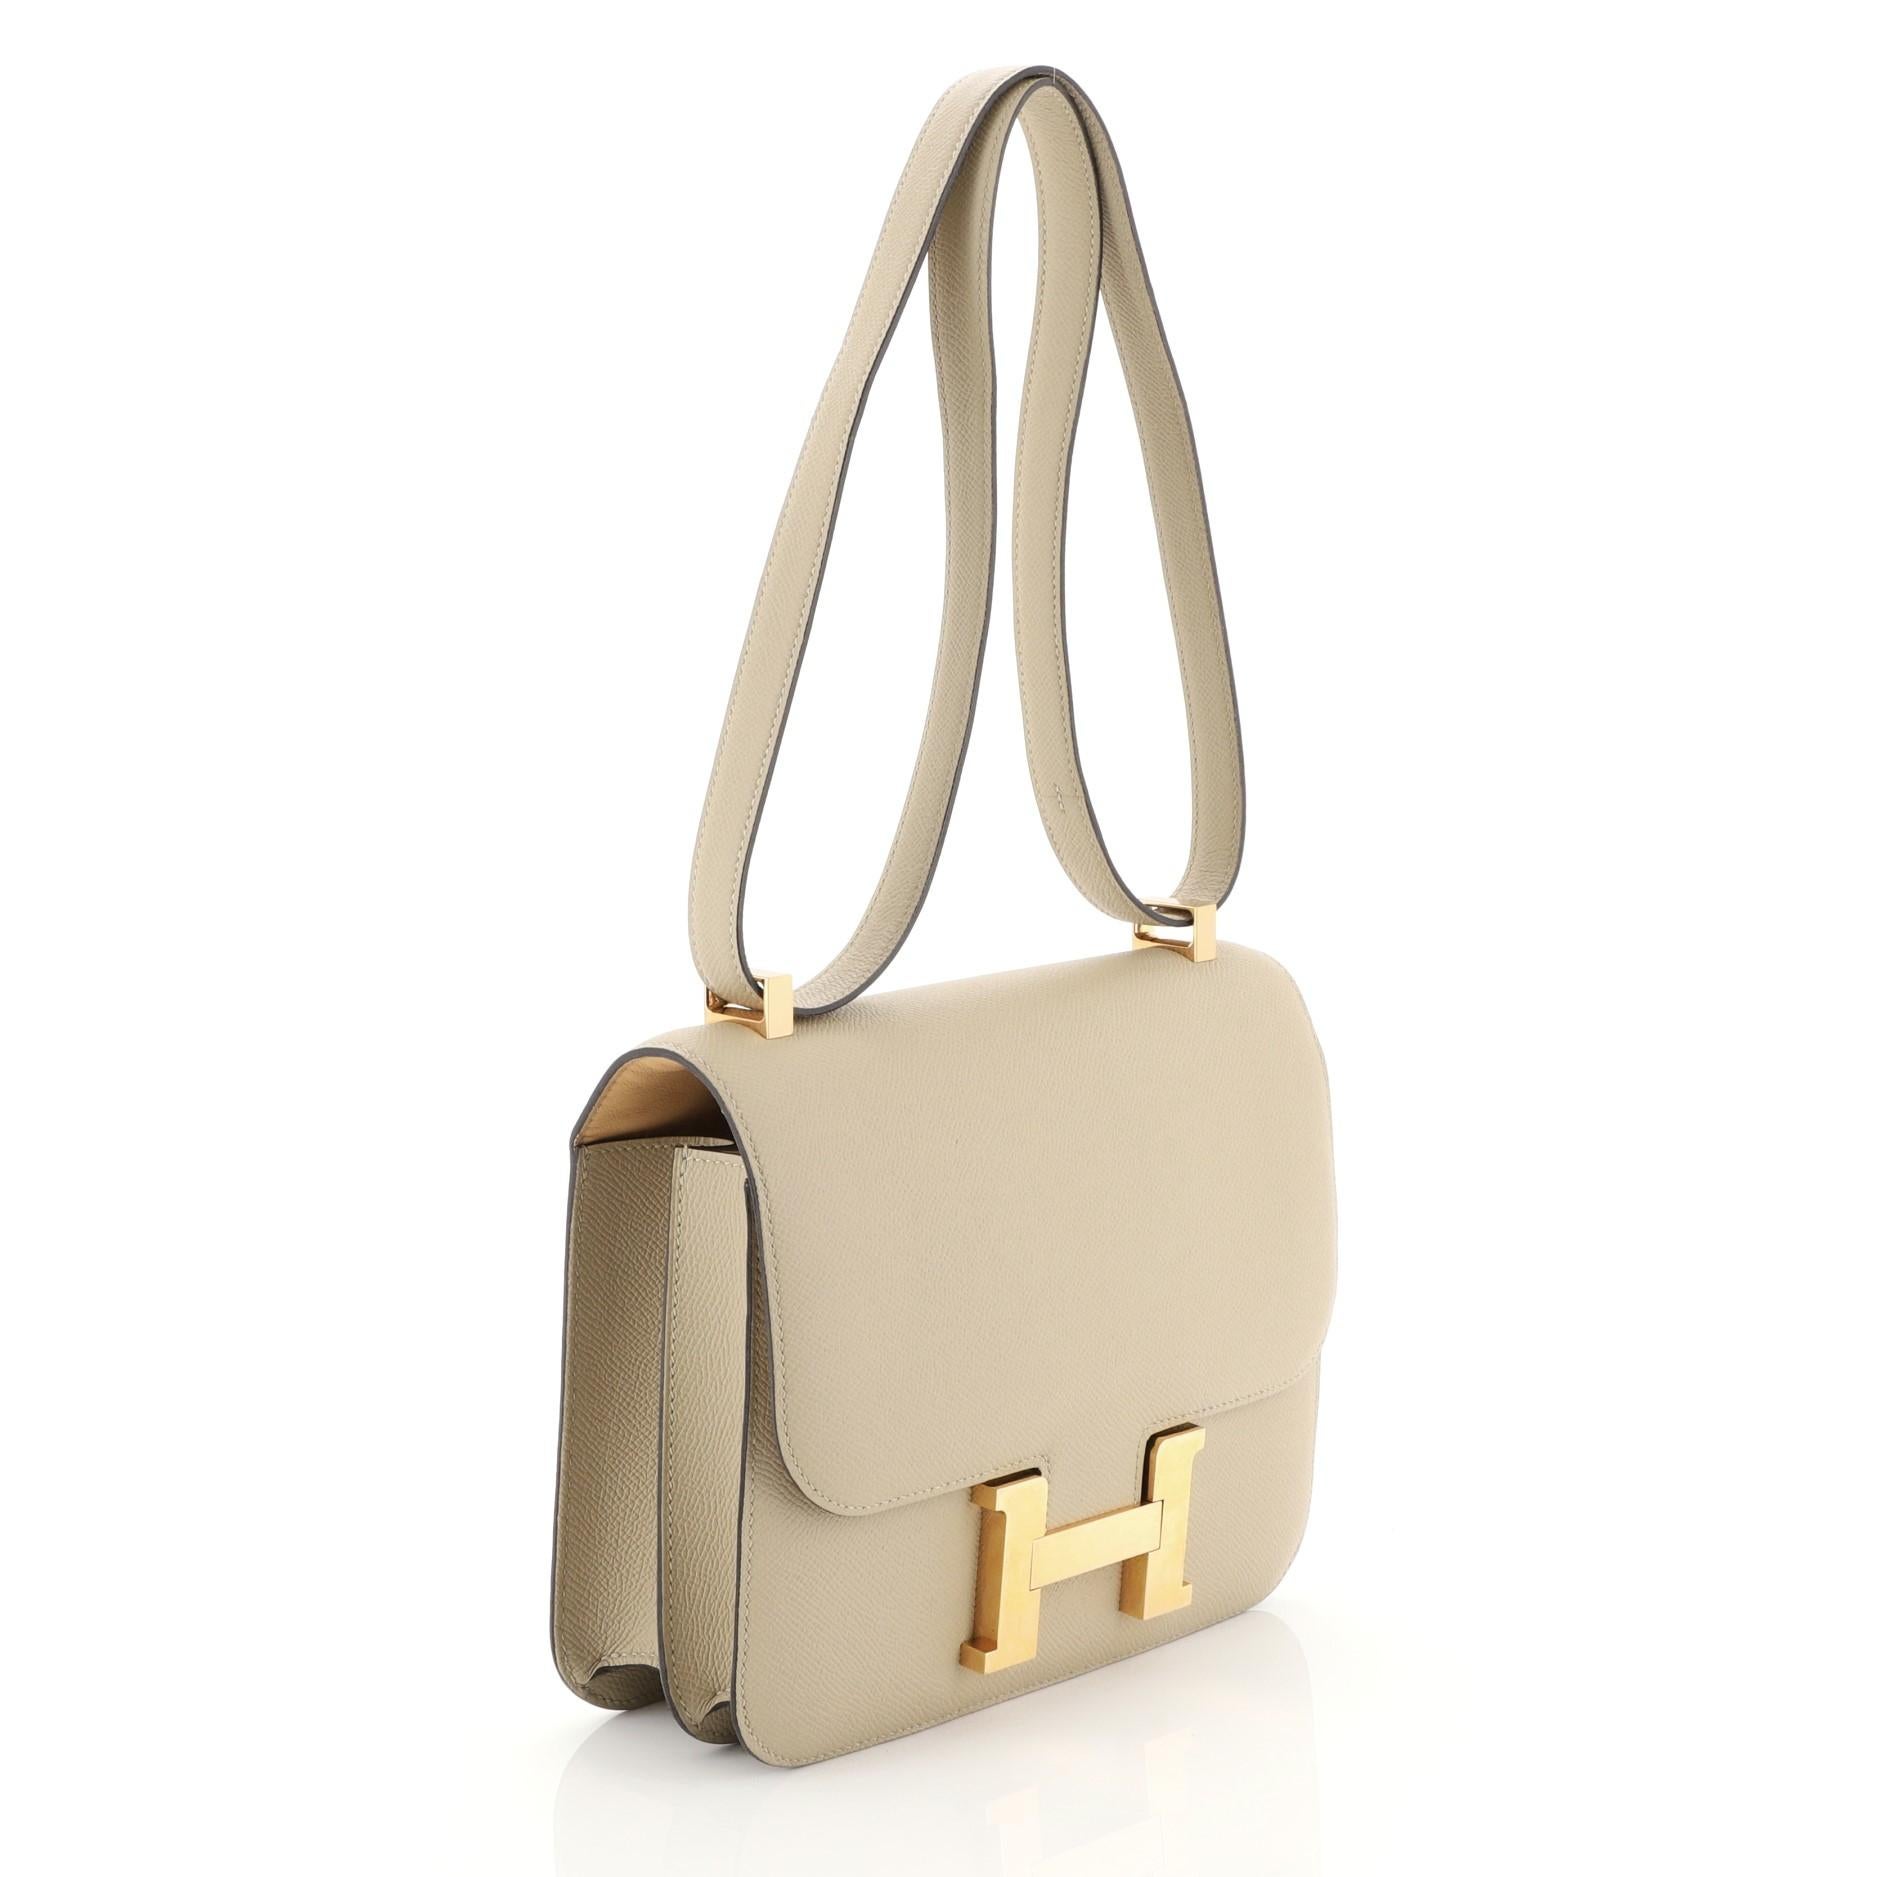 This Hermes Constance Handbag Verso Epsom 24, crafted from Trench neutral Epsom leather, features a long leather strap and gold hardware. Its push-lock closure opens to a Natural Sable Agneau leather interior divided into two compartments with zip